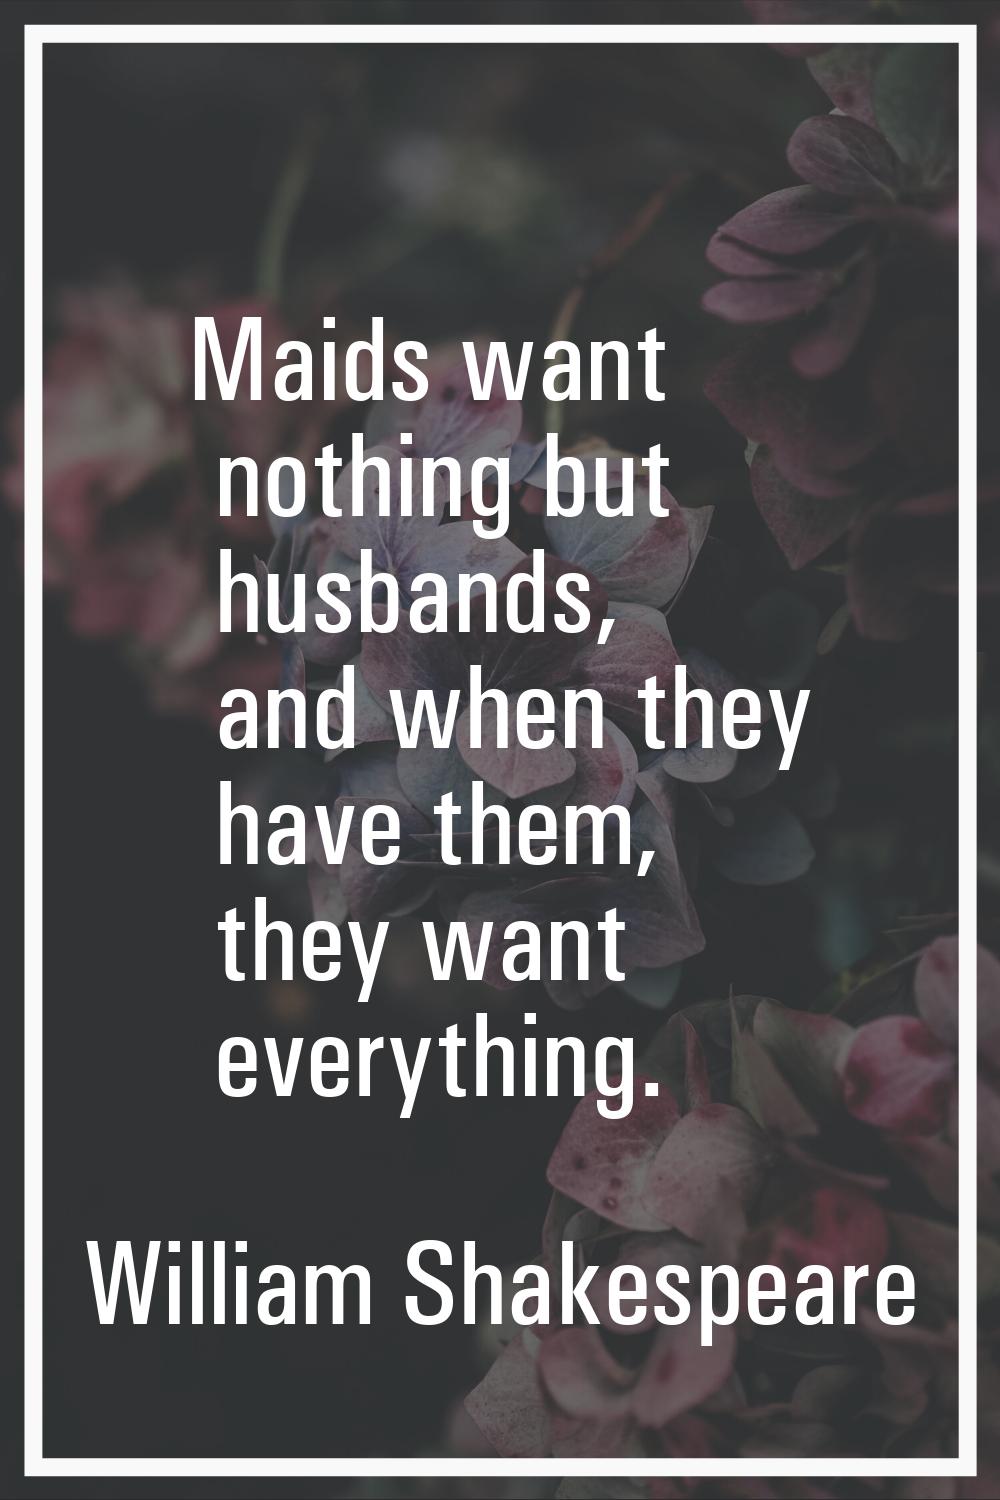 Maids want nothing but husbands, and when they have them, they want everything.